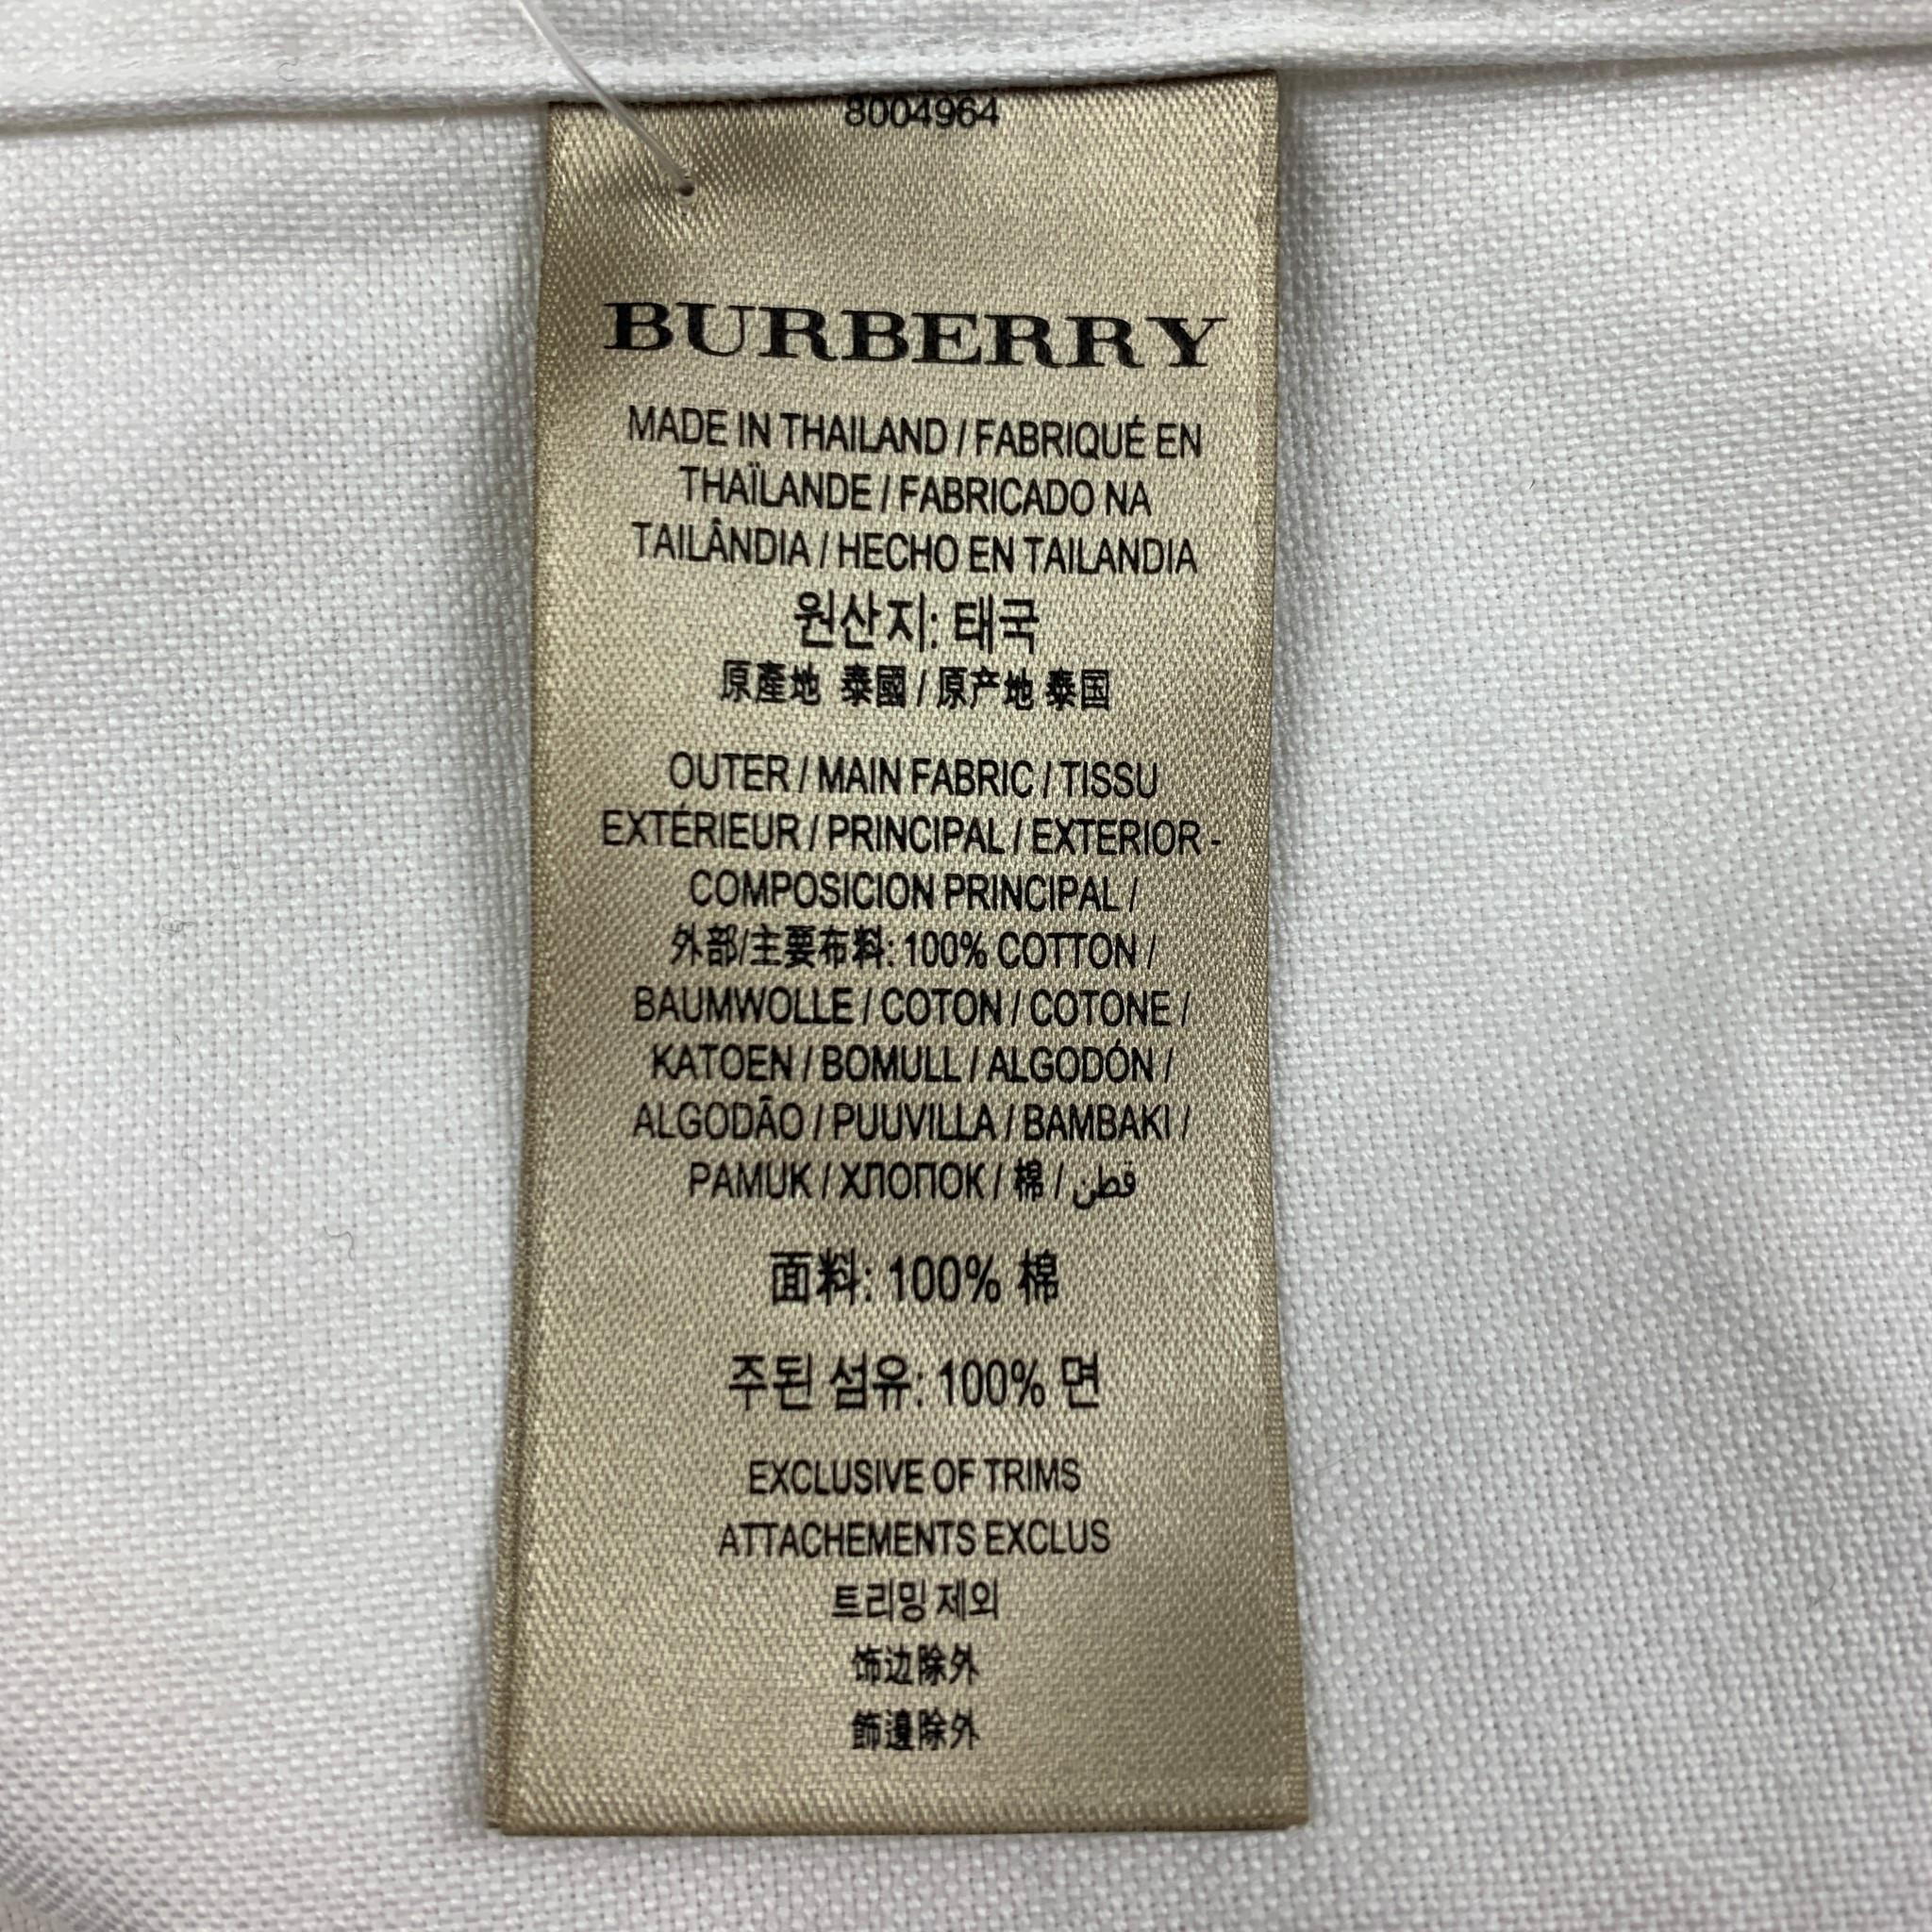 is burberry made in thailand